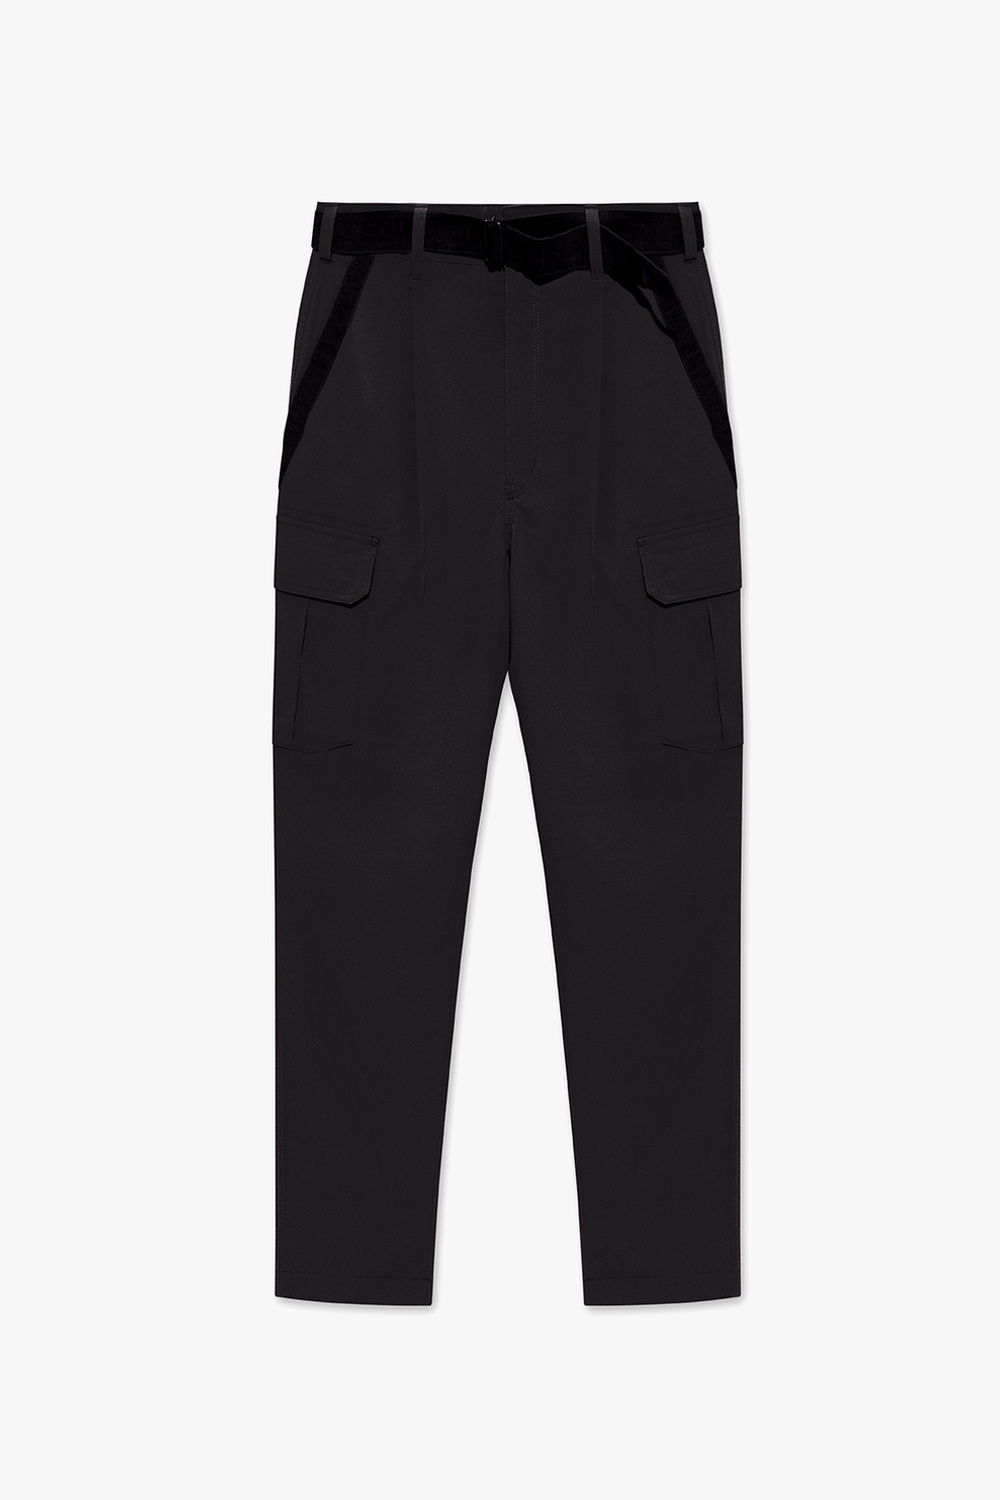 Black Cargo trousers White Mountaineering - GenesinlifeShops Italy - Nike  Running Fast Tight leggings in black and gold